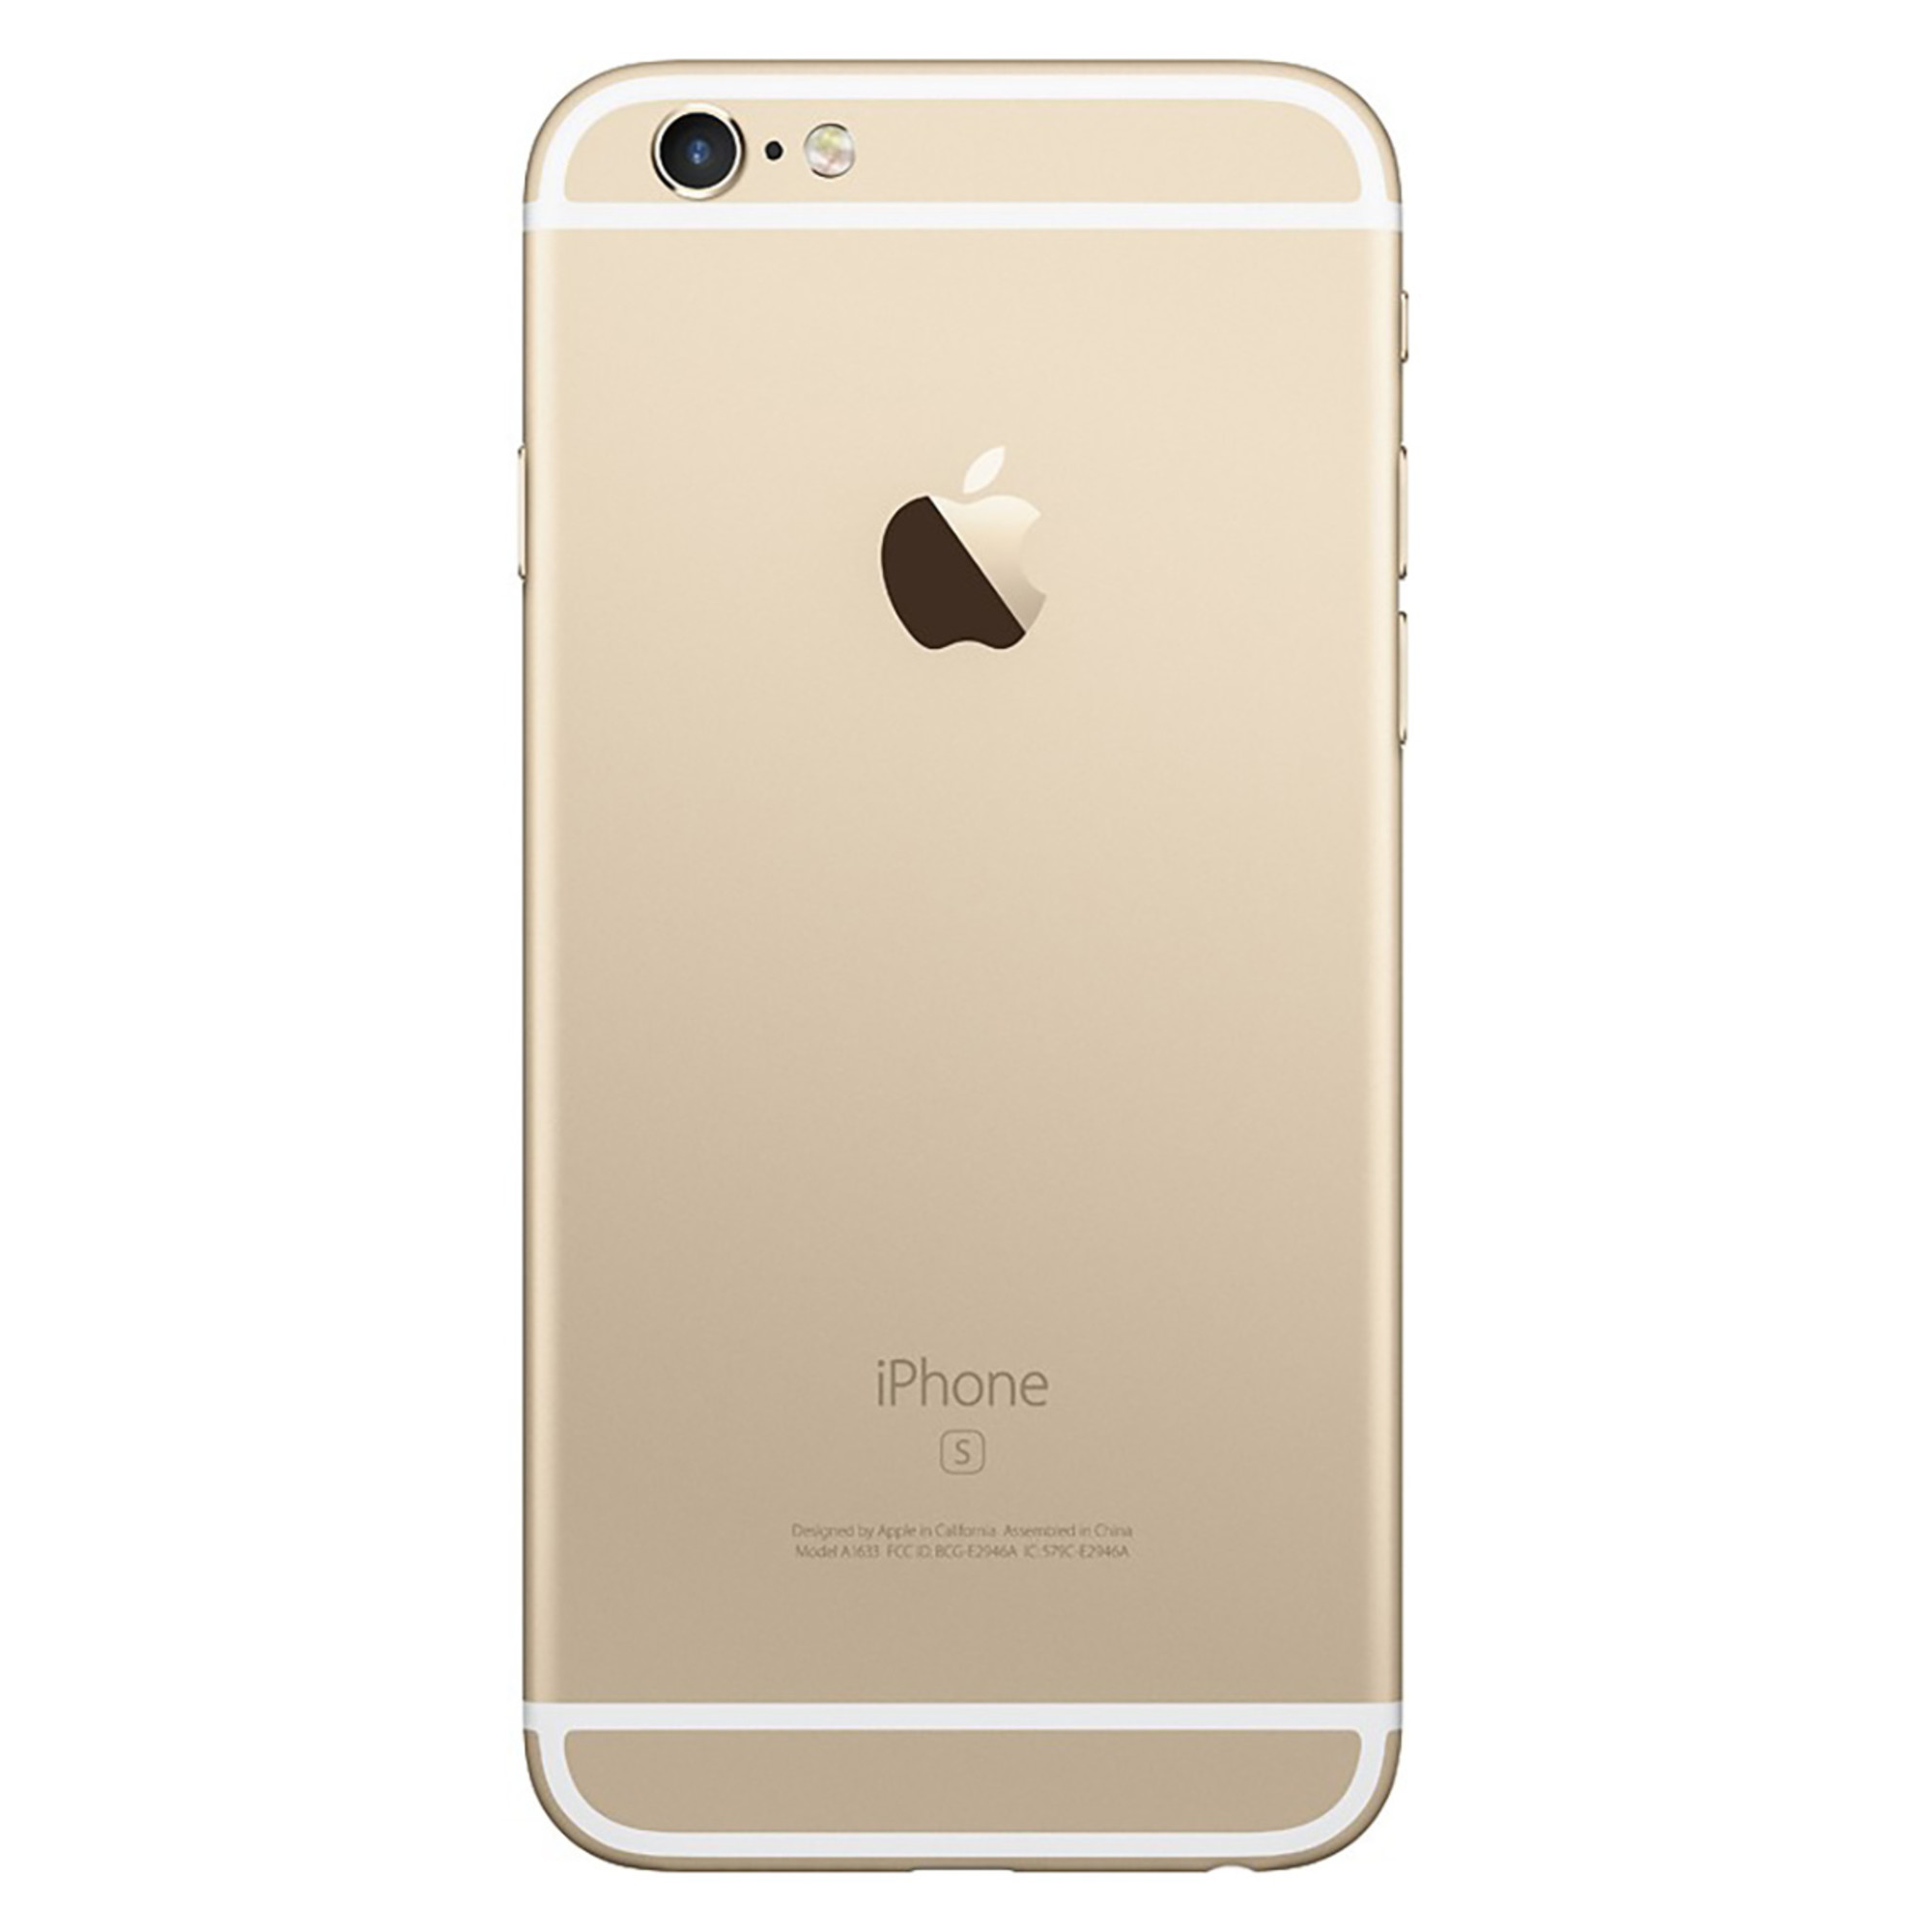 Pre-Owned Apple iPhone 6s 128GB GSM Phone - Gold + WeCare Alcohol Wipes Pack (50 Wipes) (Refurbished: Good) - image 5 of 6